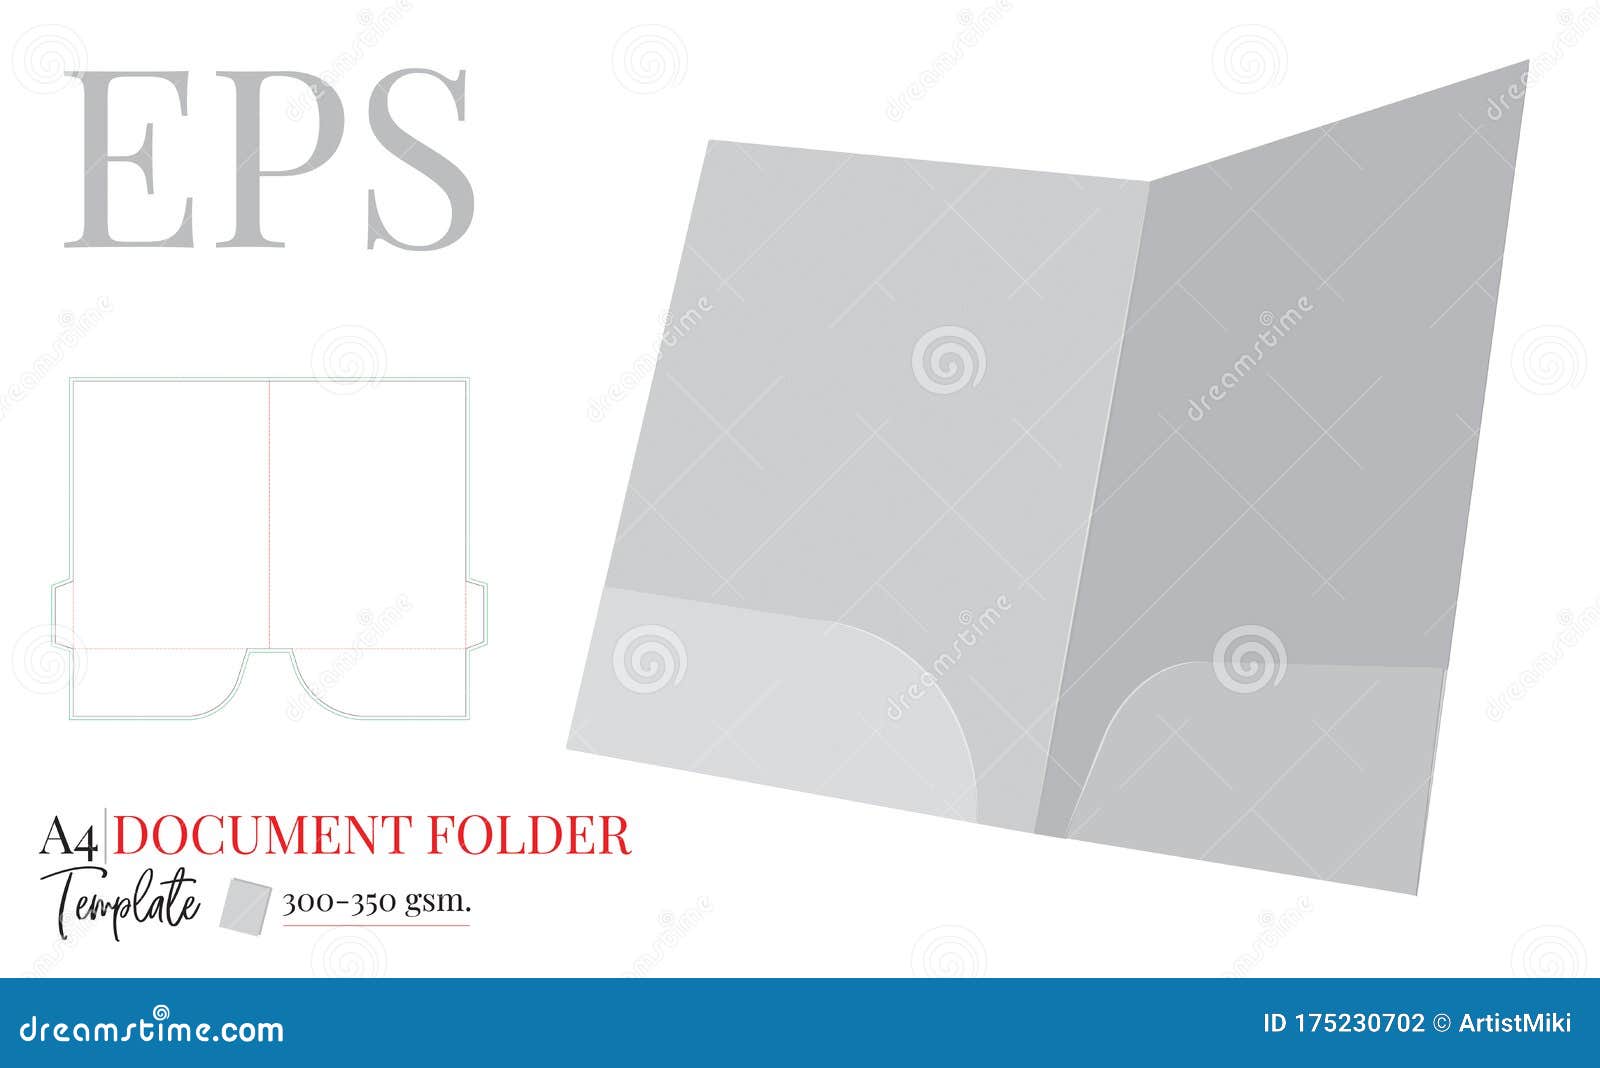 Document Folder Template. Vector with Die Cut / Laser Cut Layers. Two